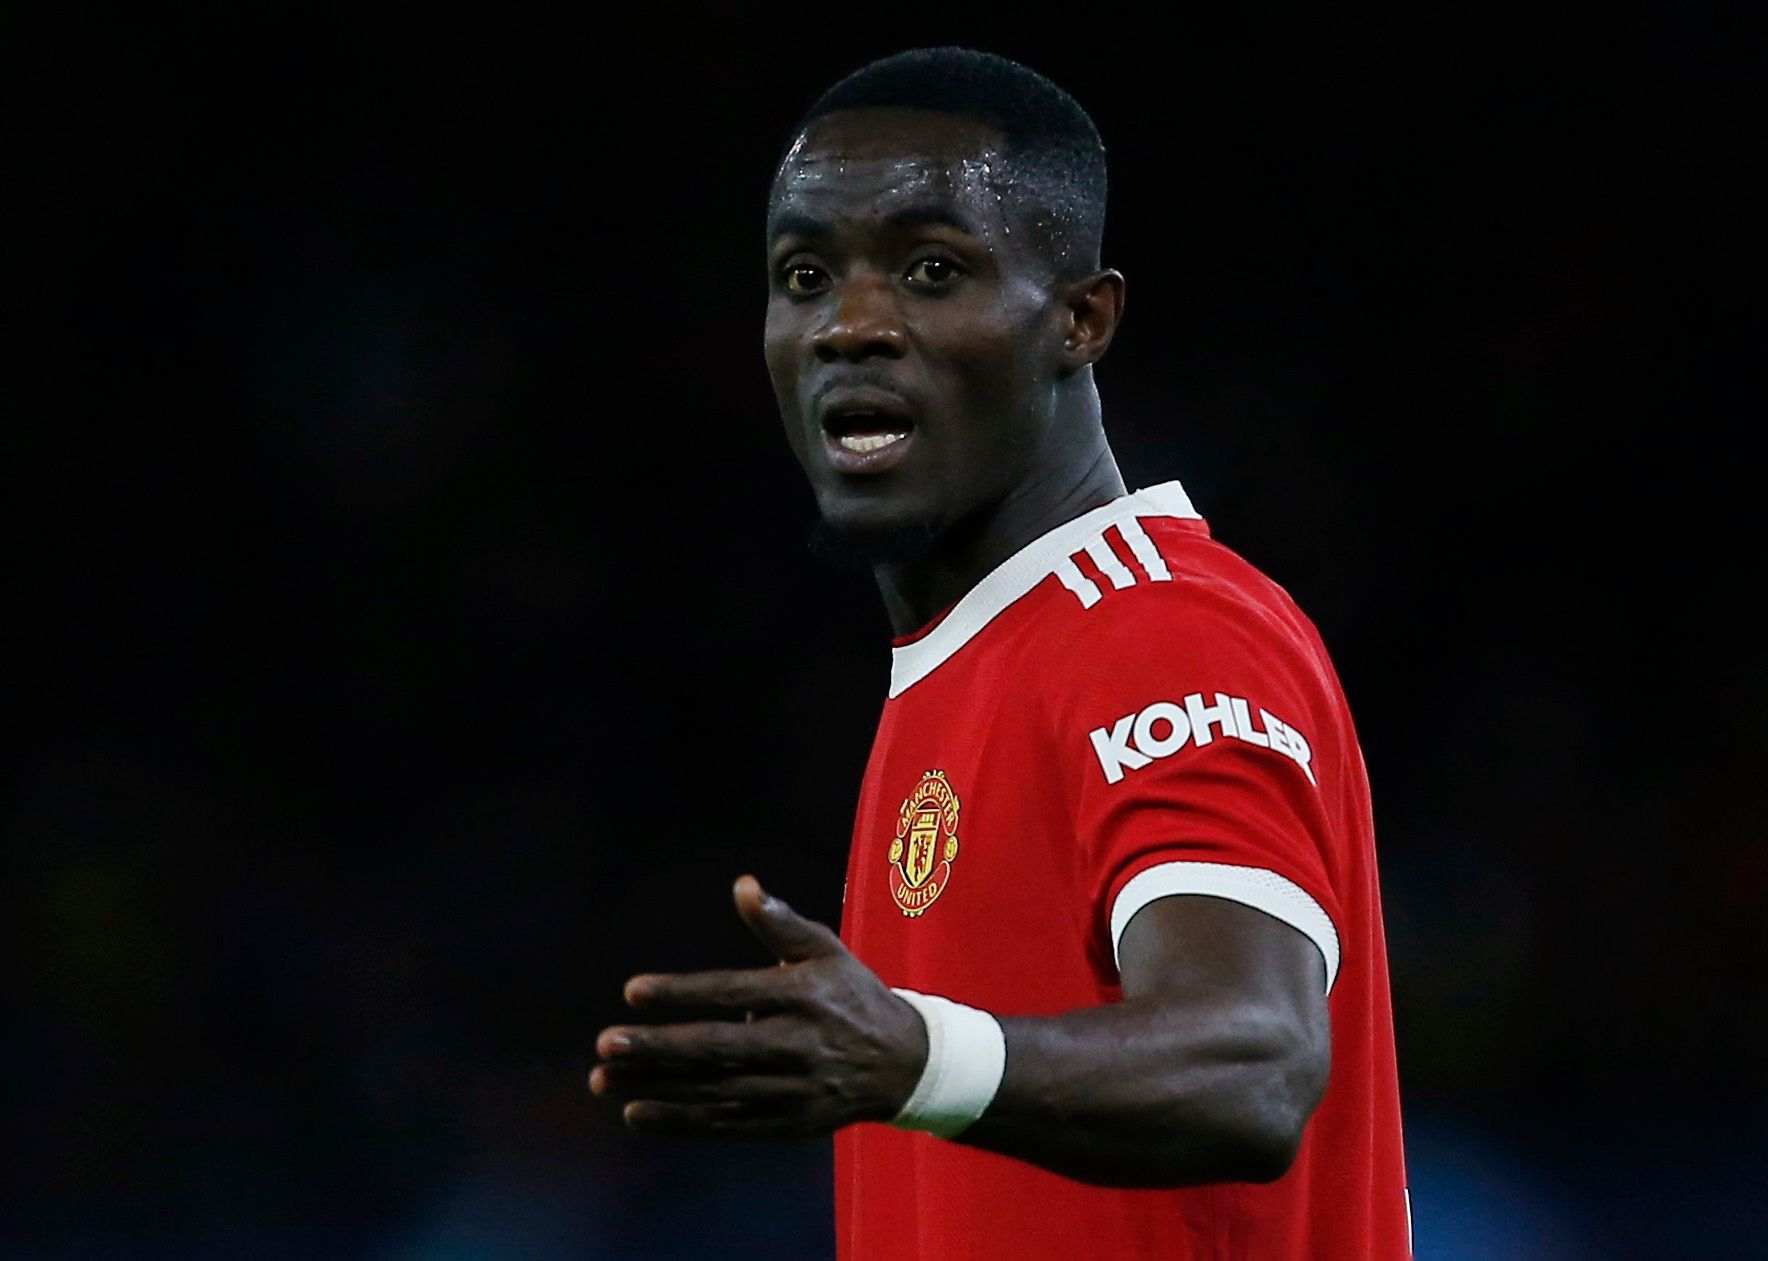 Soccer Football - Champions League - Group F - Manchester United v Young Boys - Old Trafford, Manchester, Britain - December 8, 2021 Manchester United's Eric Bailly reacts REUTERS/Craig Brough